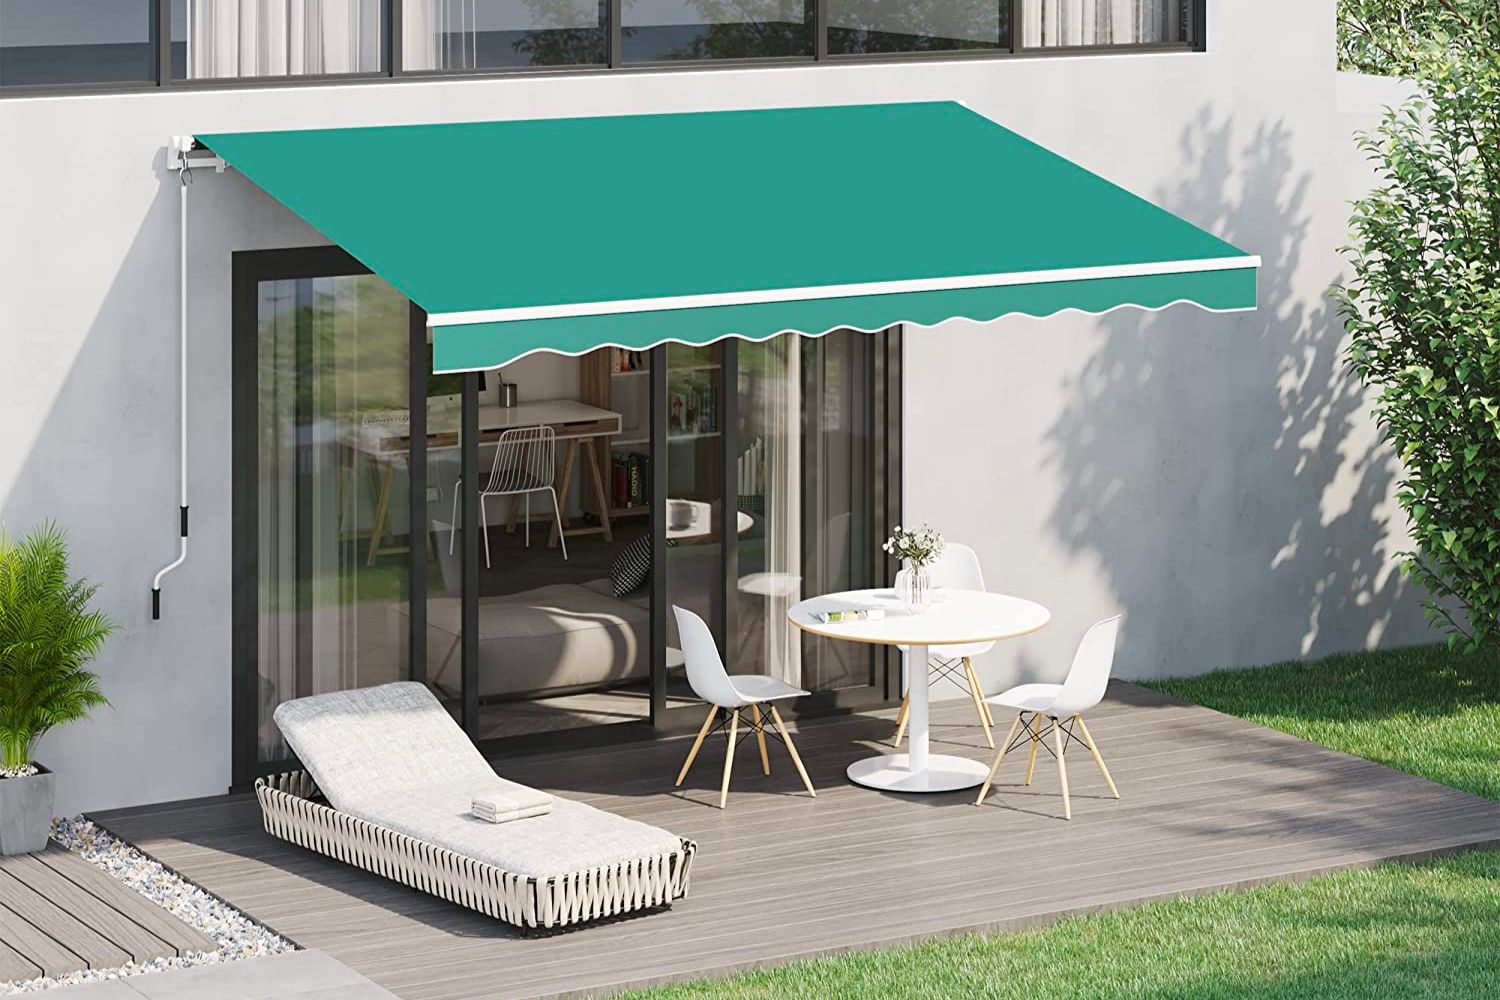 The Best Retractable Awnings Option extends off a sliding glass door over patio furniture